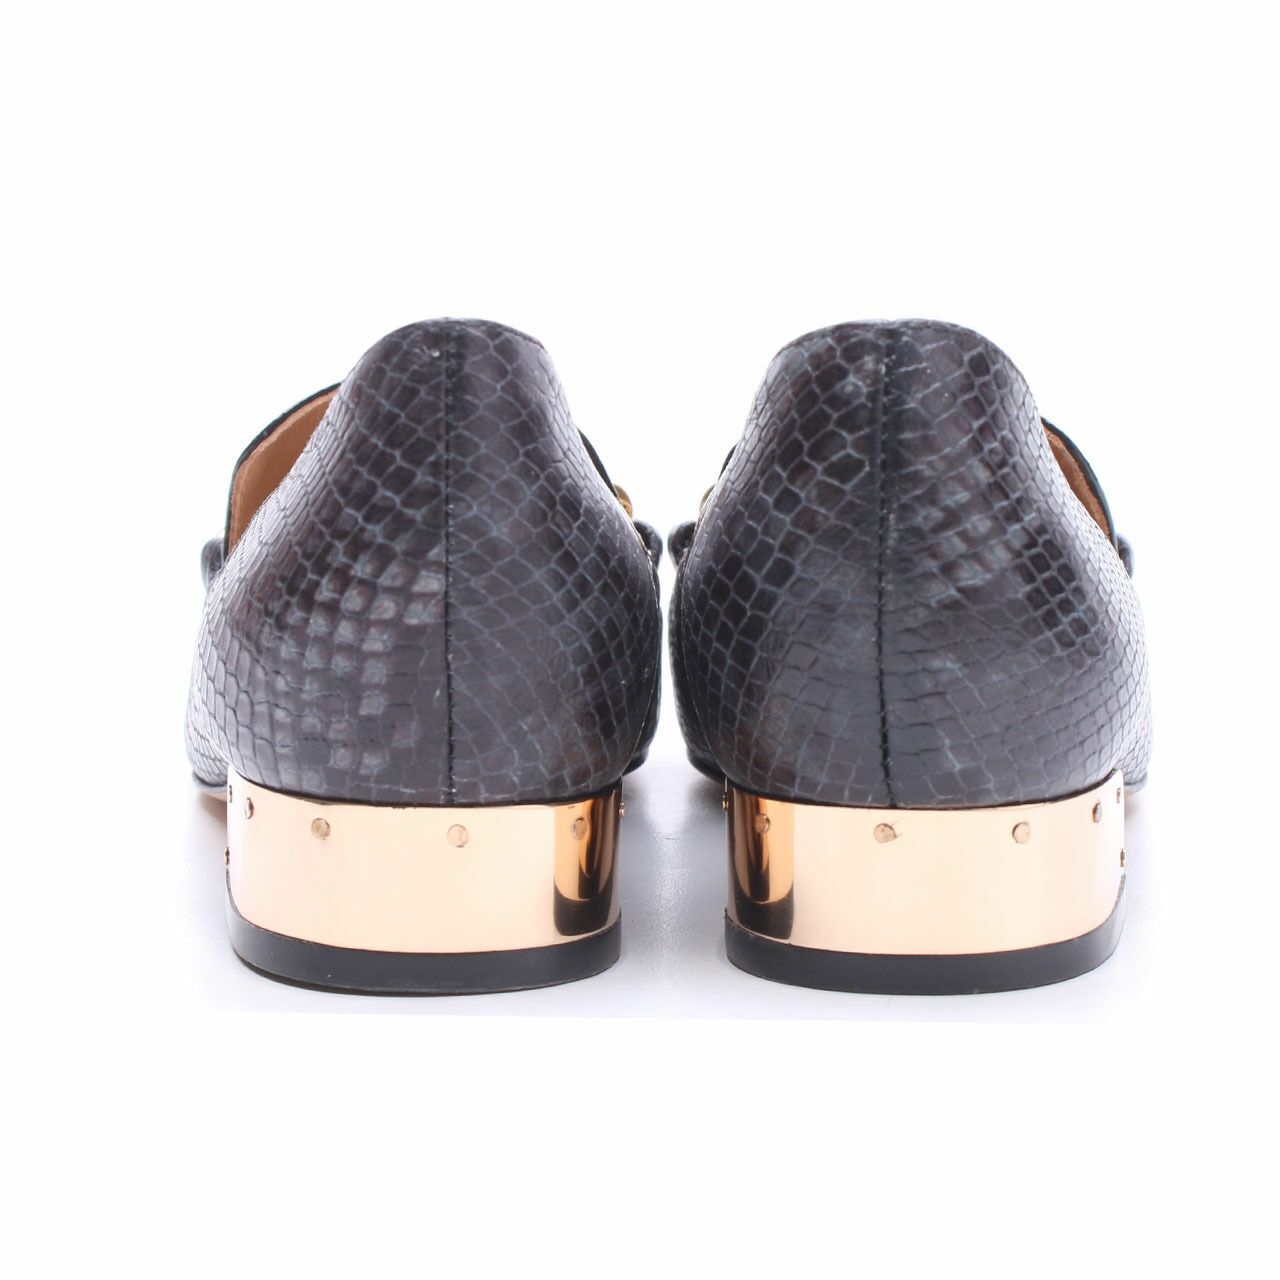 Tory Burch Jessa Stamped Snake Printed  Perfect Black Loafers Flats